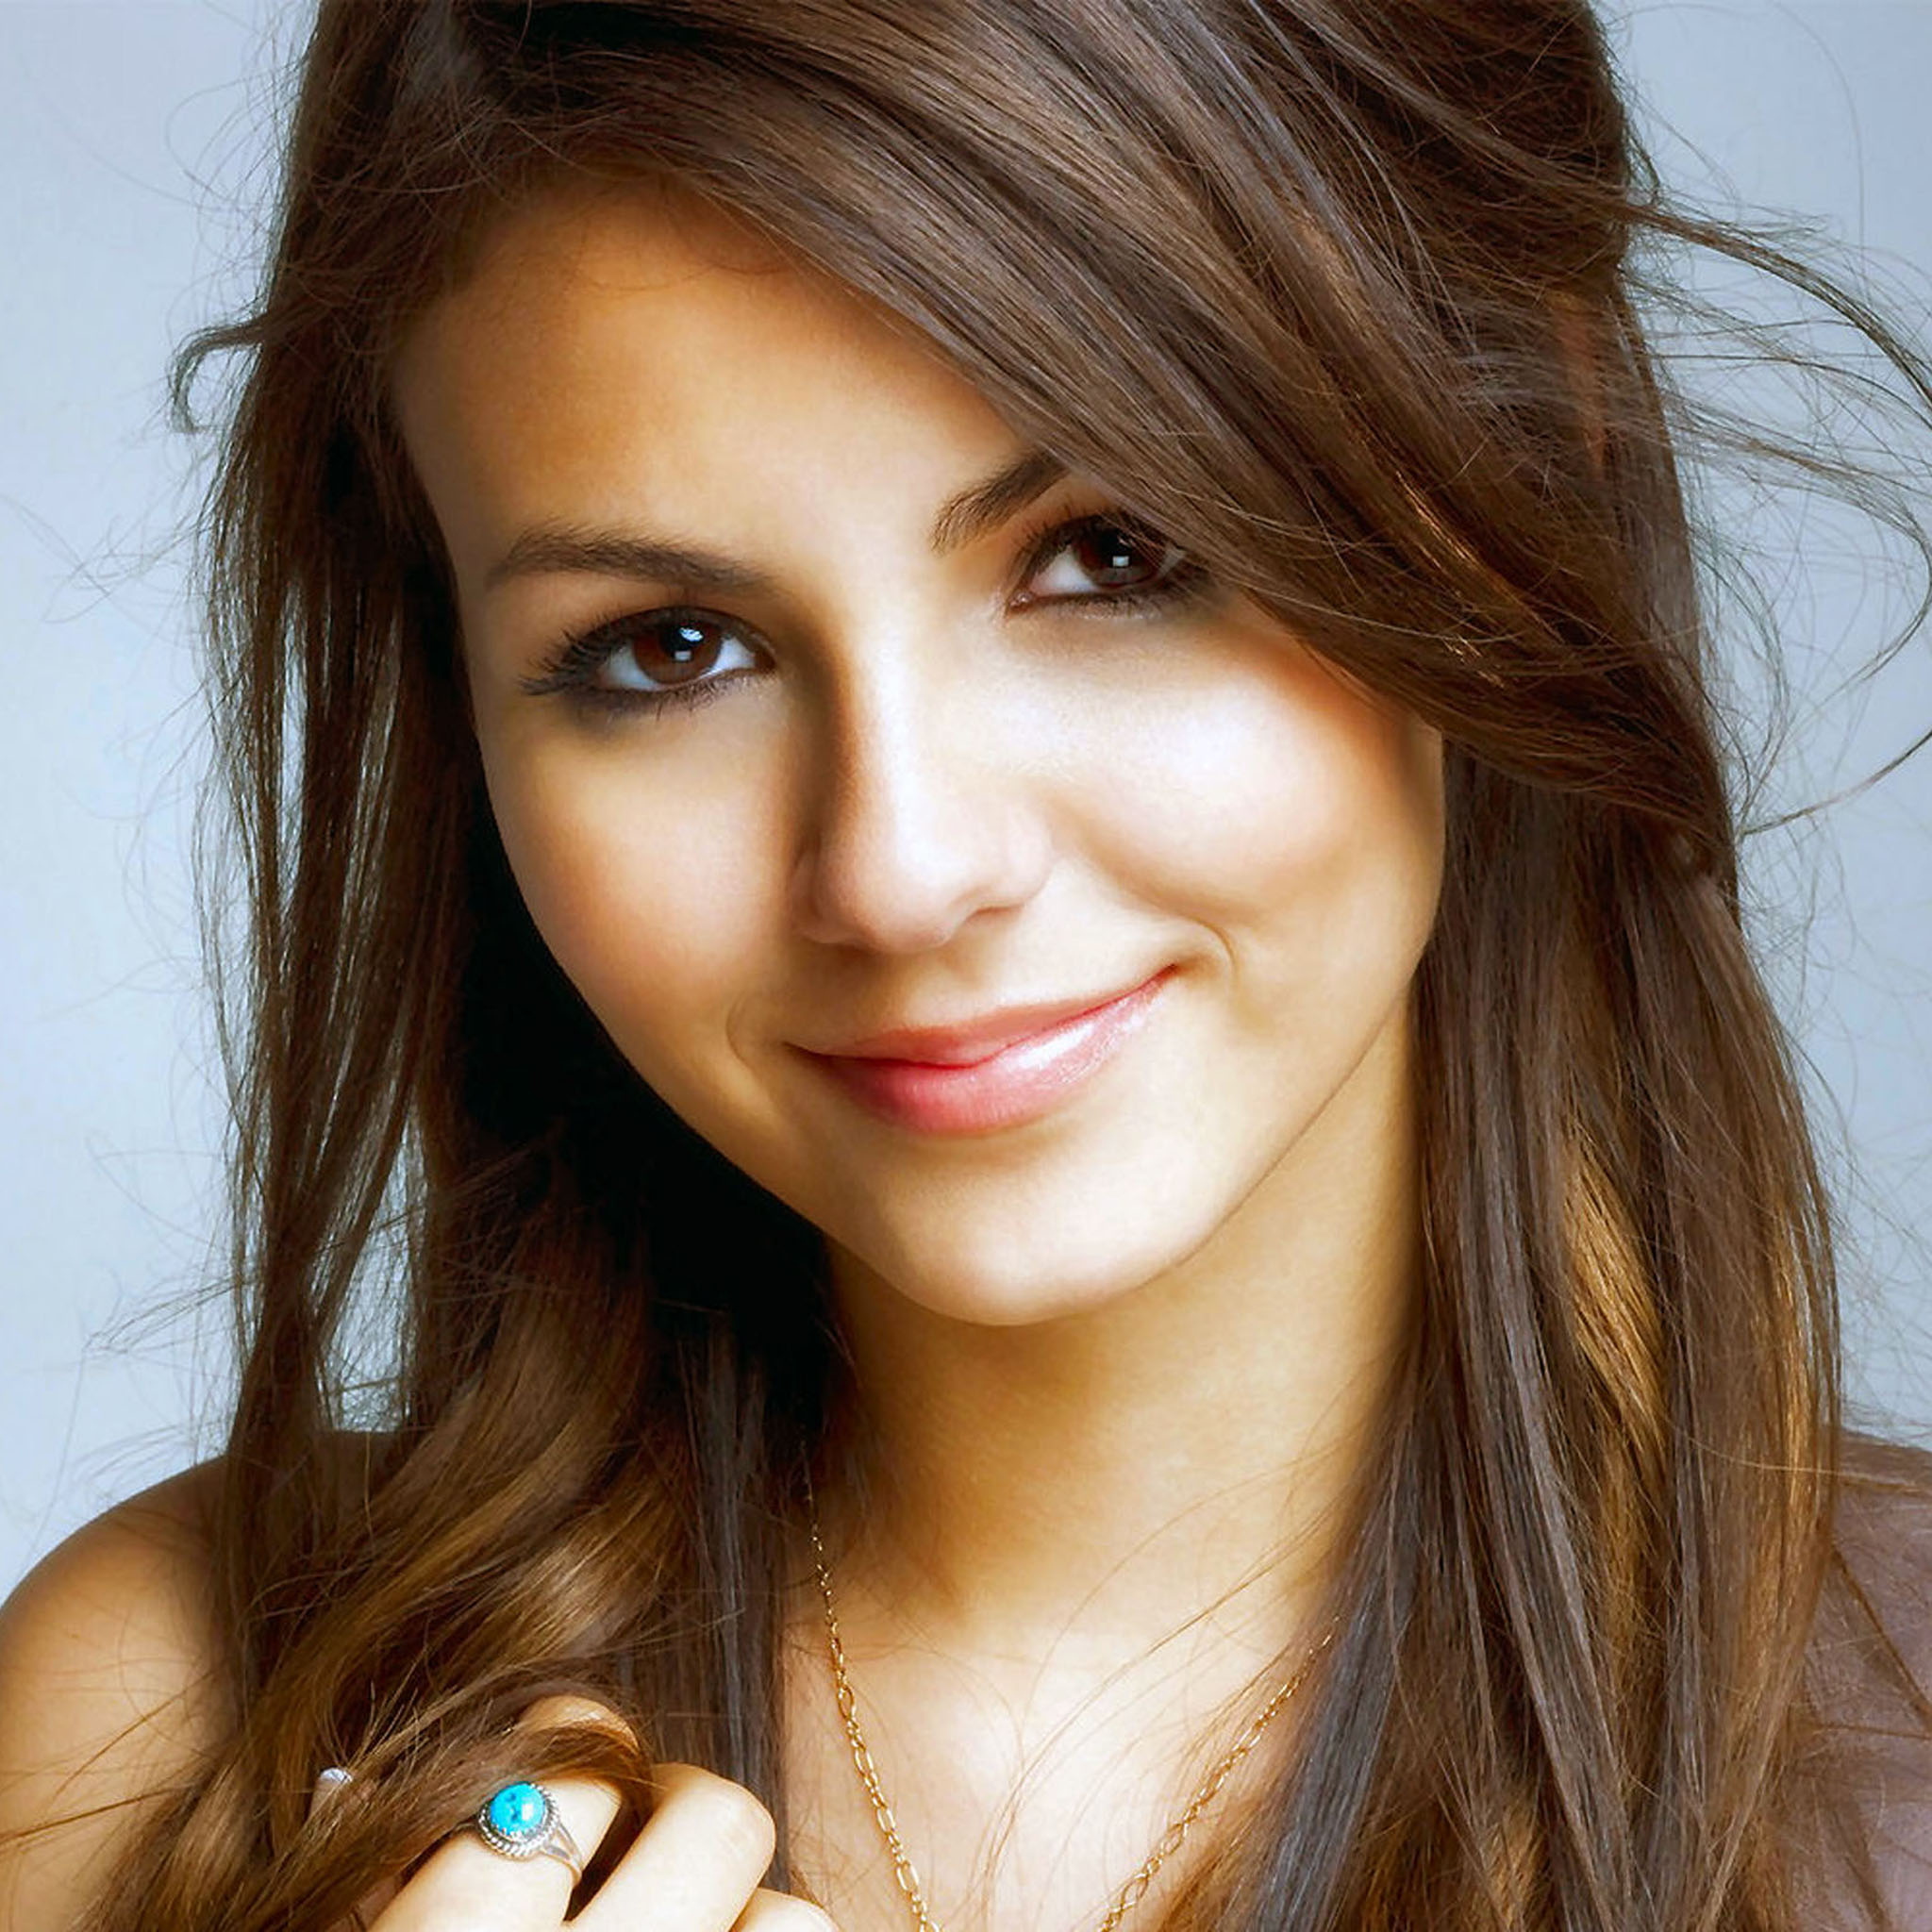 Victoria Justice Photoshoot 2017 Wallpapers